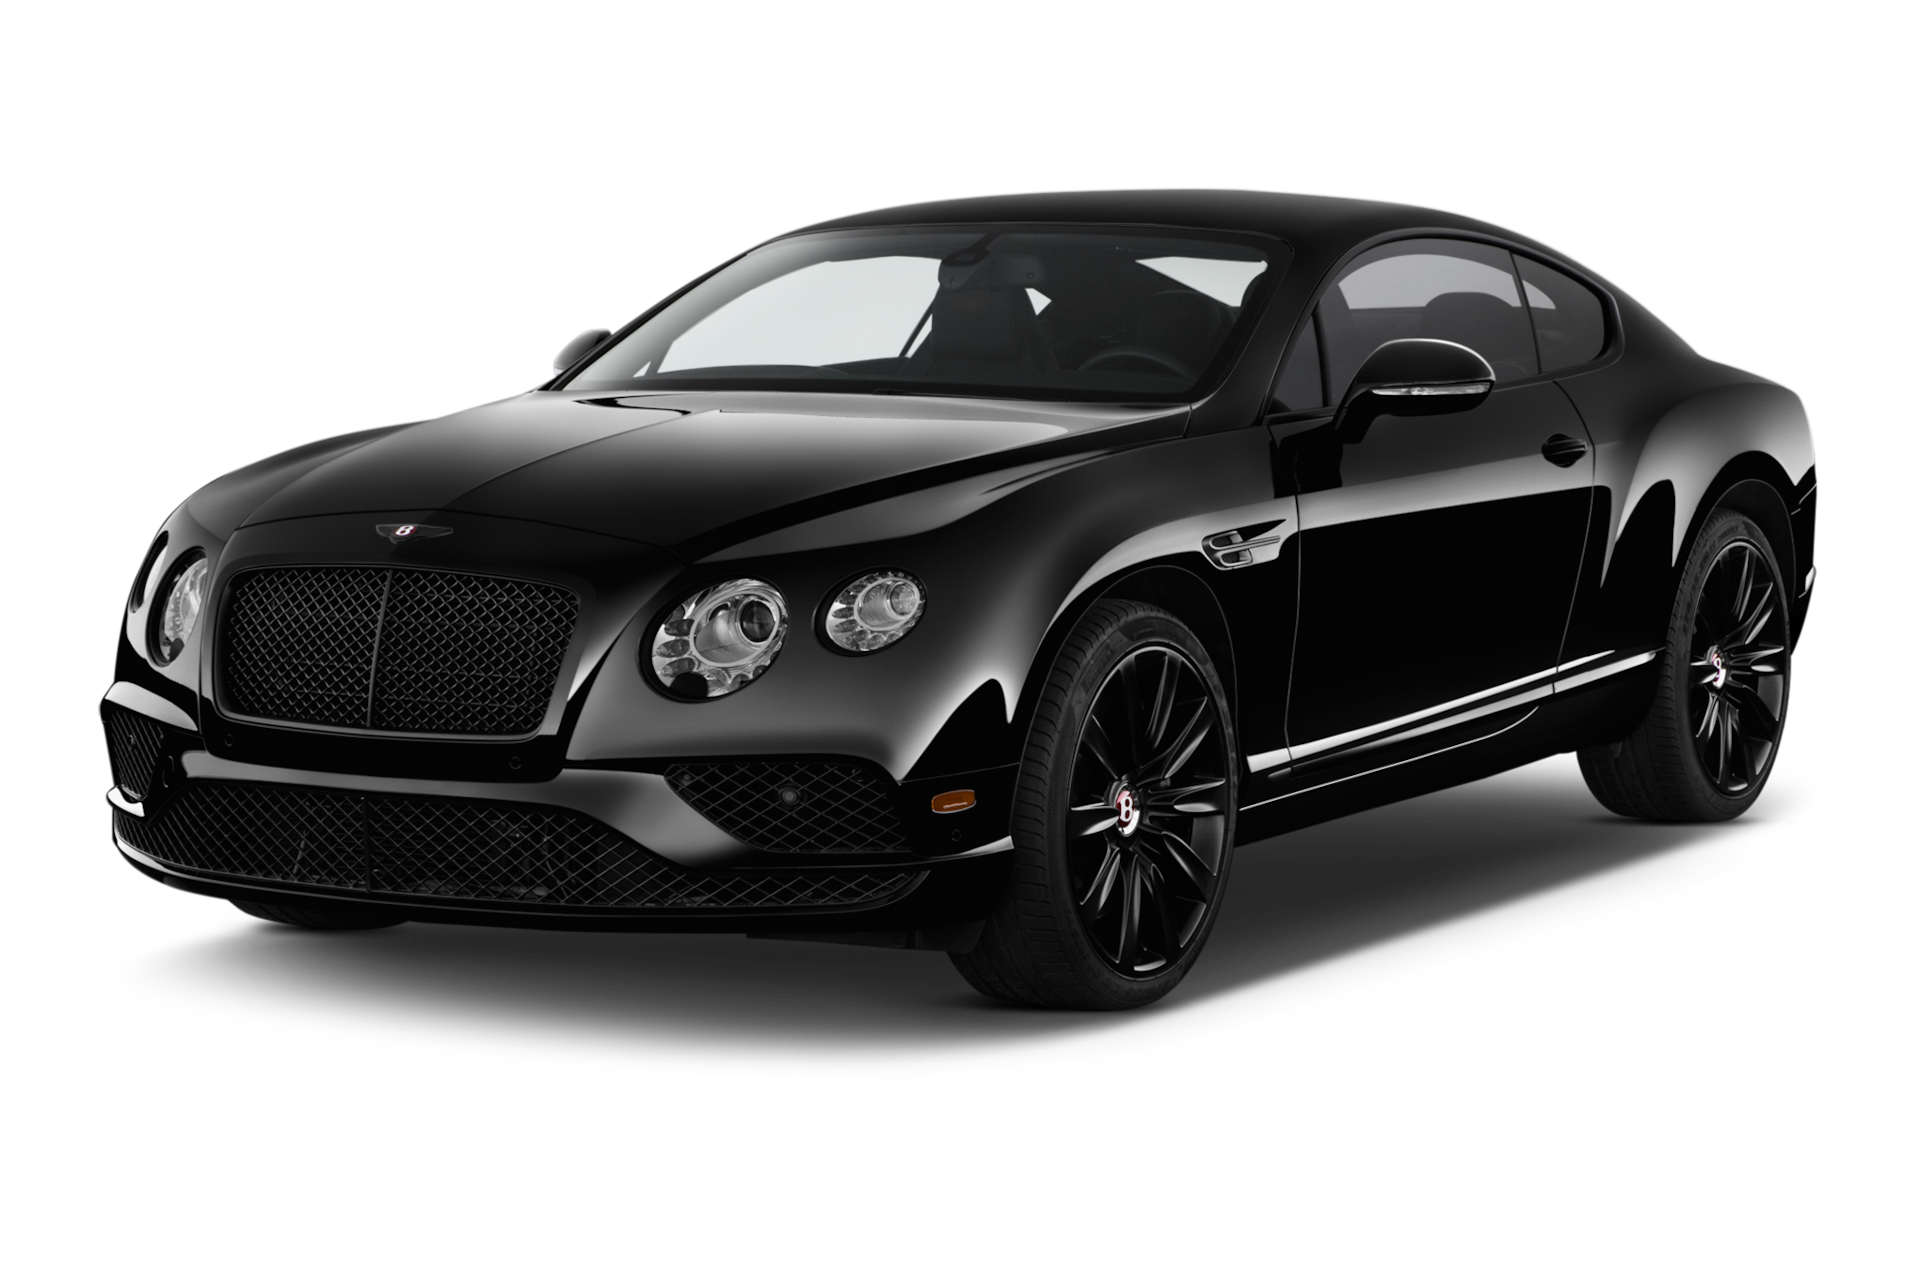 2018 Bentley Continental GT Prices, Reviews, and Photos - MotorTrend